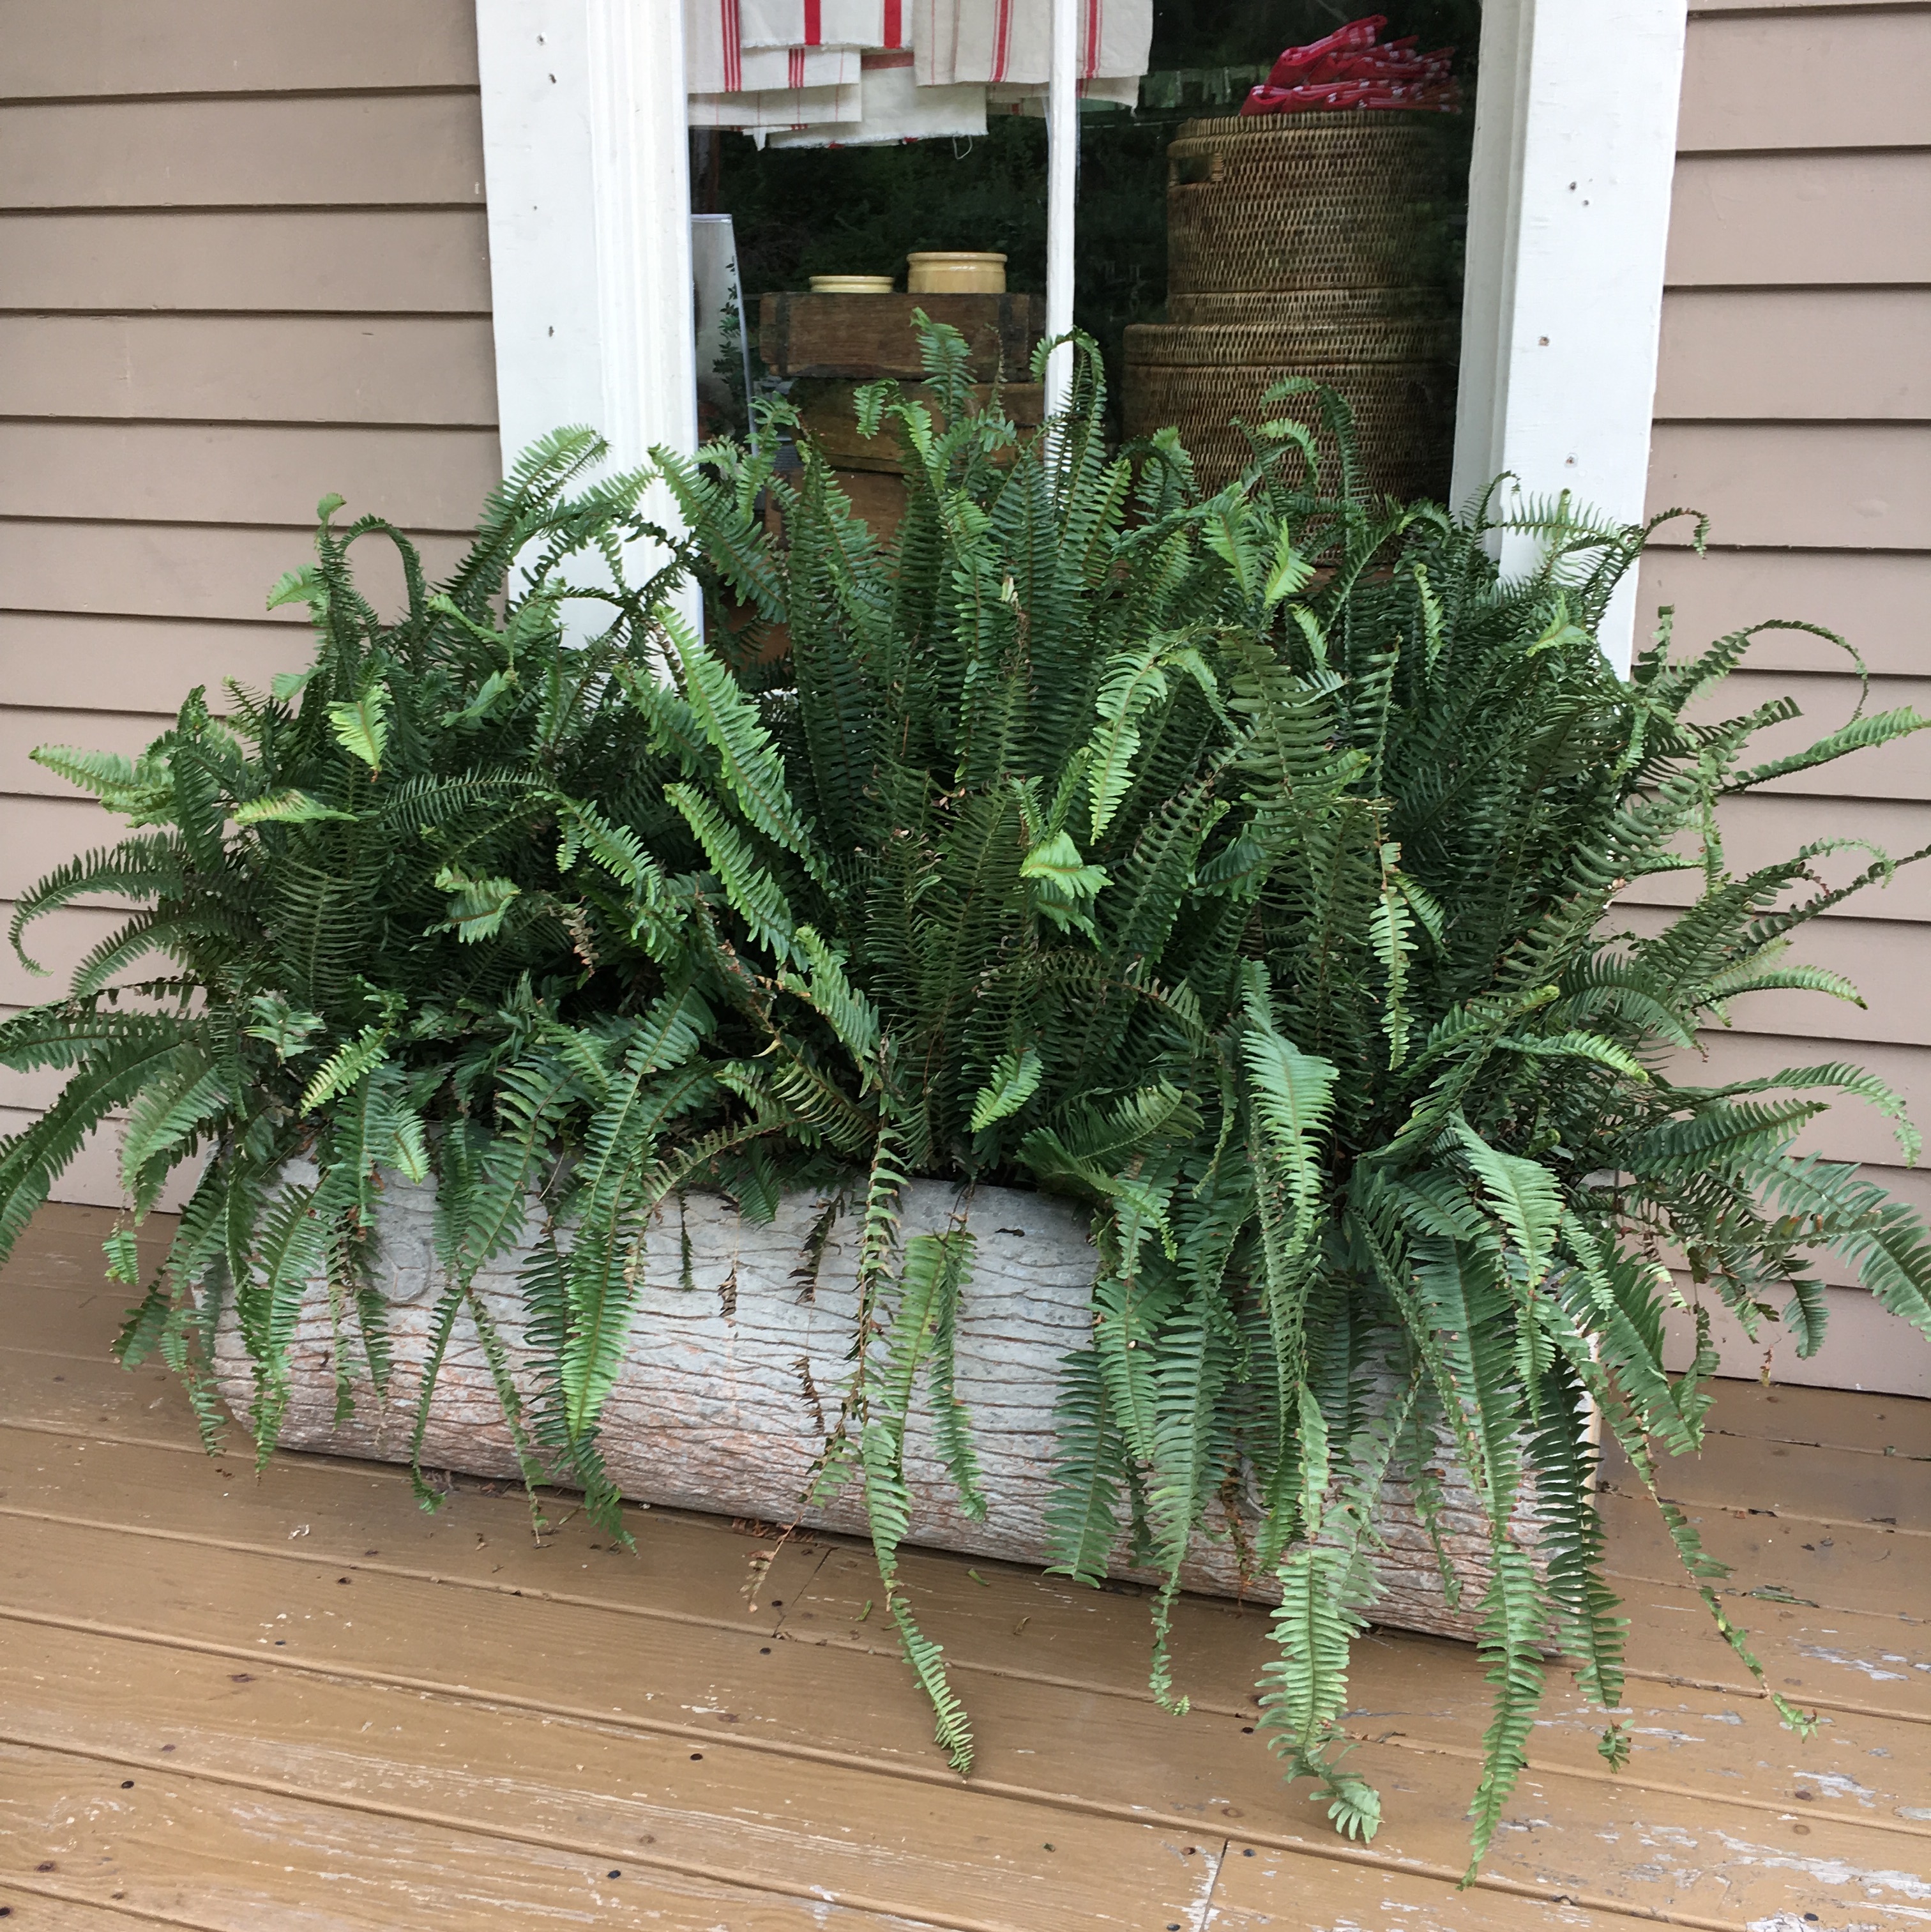 Faux Bois planter filled with ferns seen in Preston CT. - More on Faux Bois at Thinking Outside the Boxwood